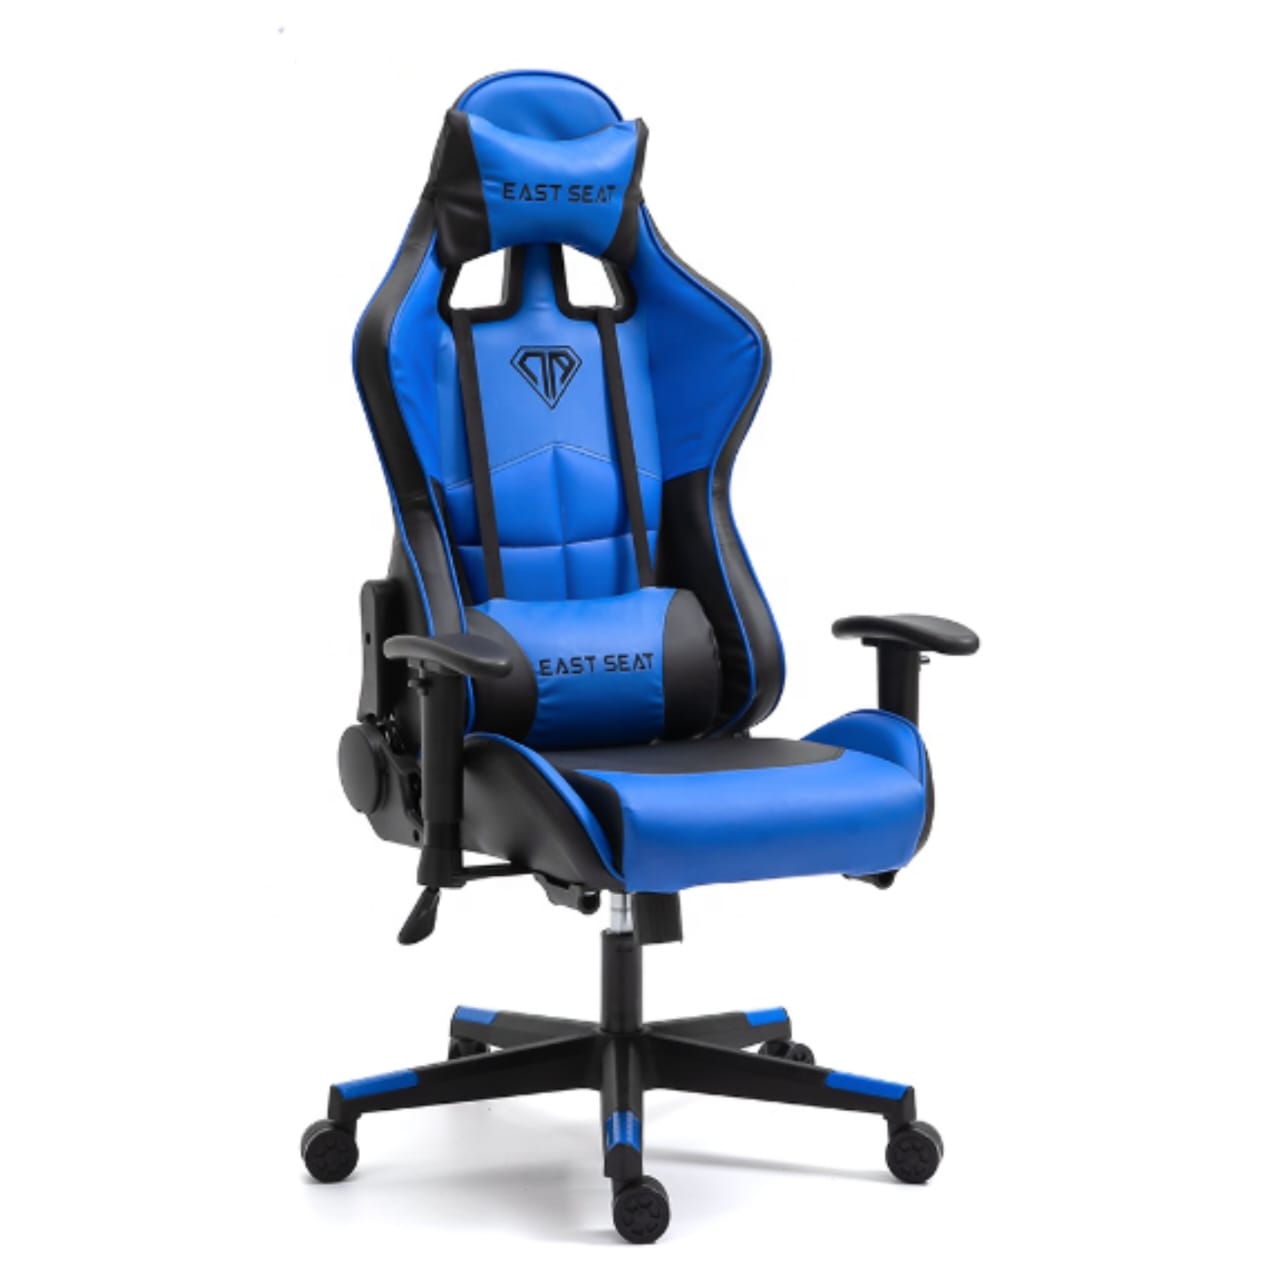 East Seat ESports Gaming Chair - 5 Models